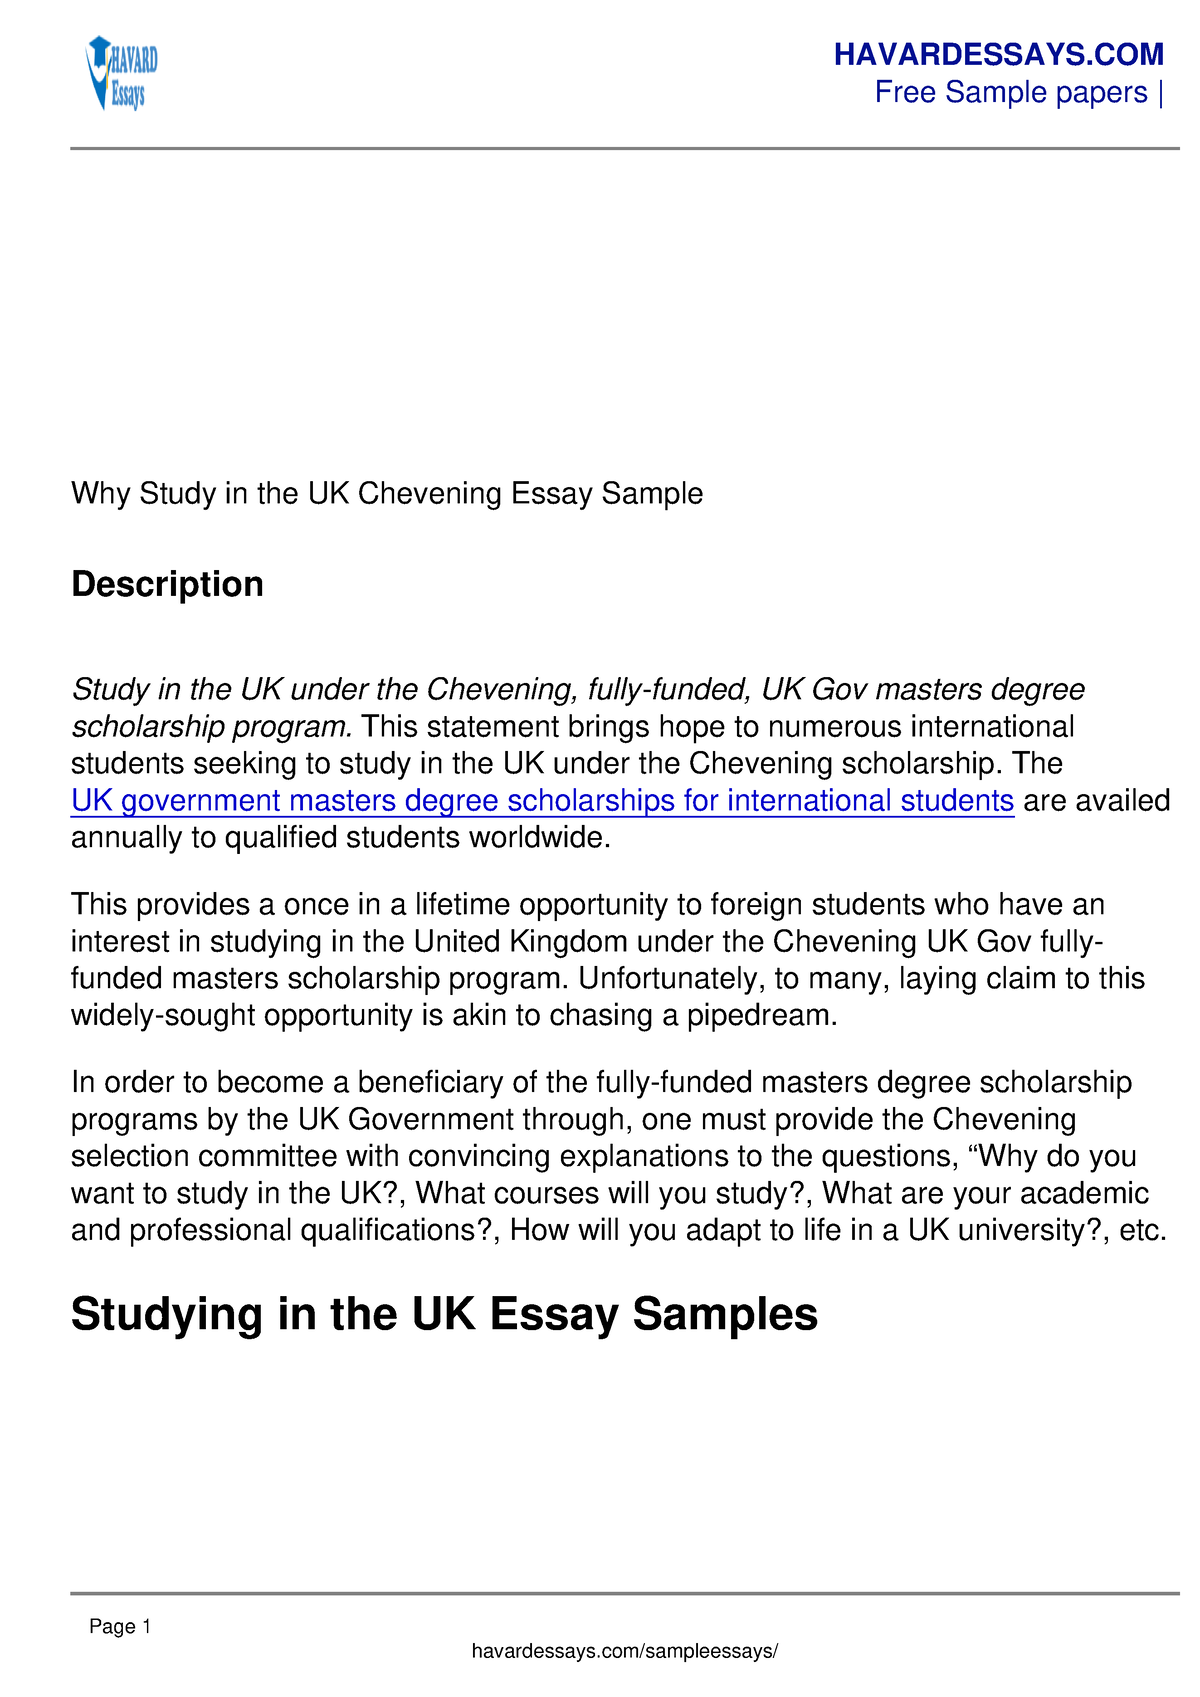 chevening essay on studying in the uk